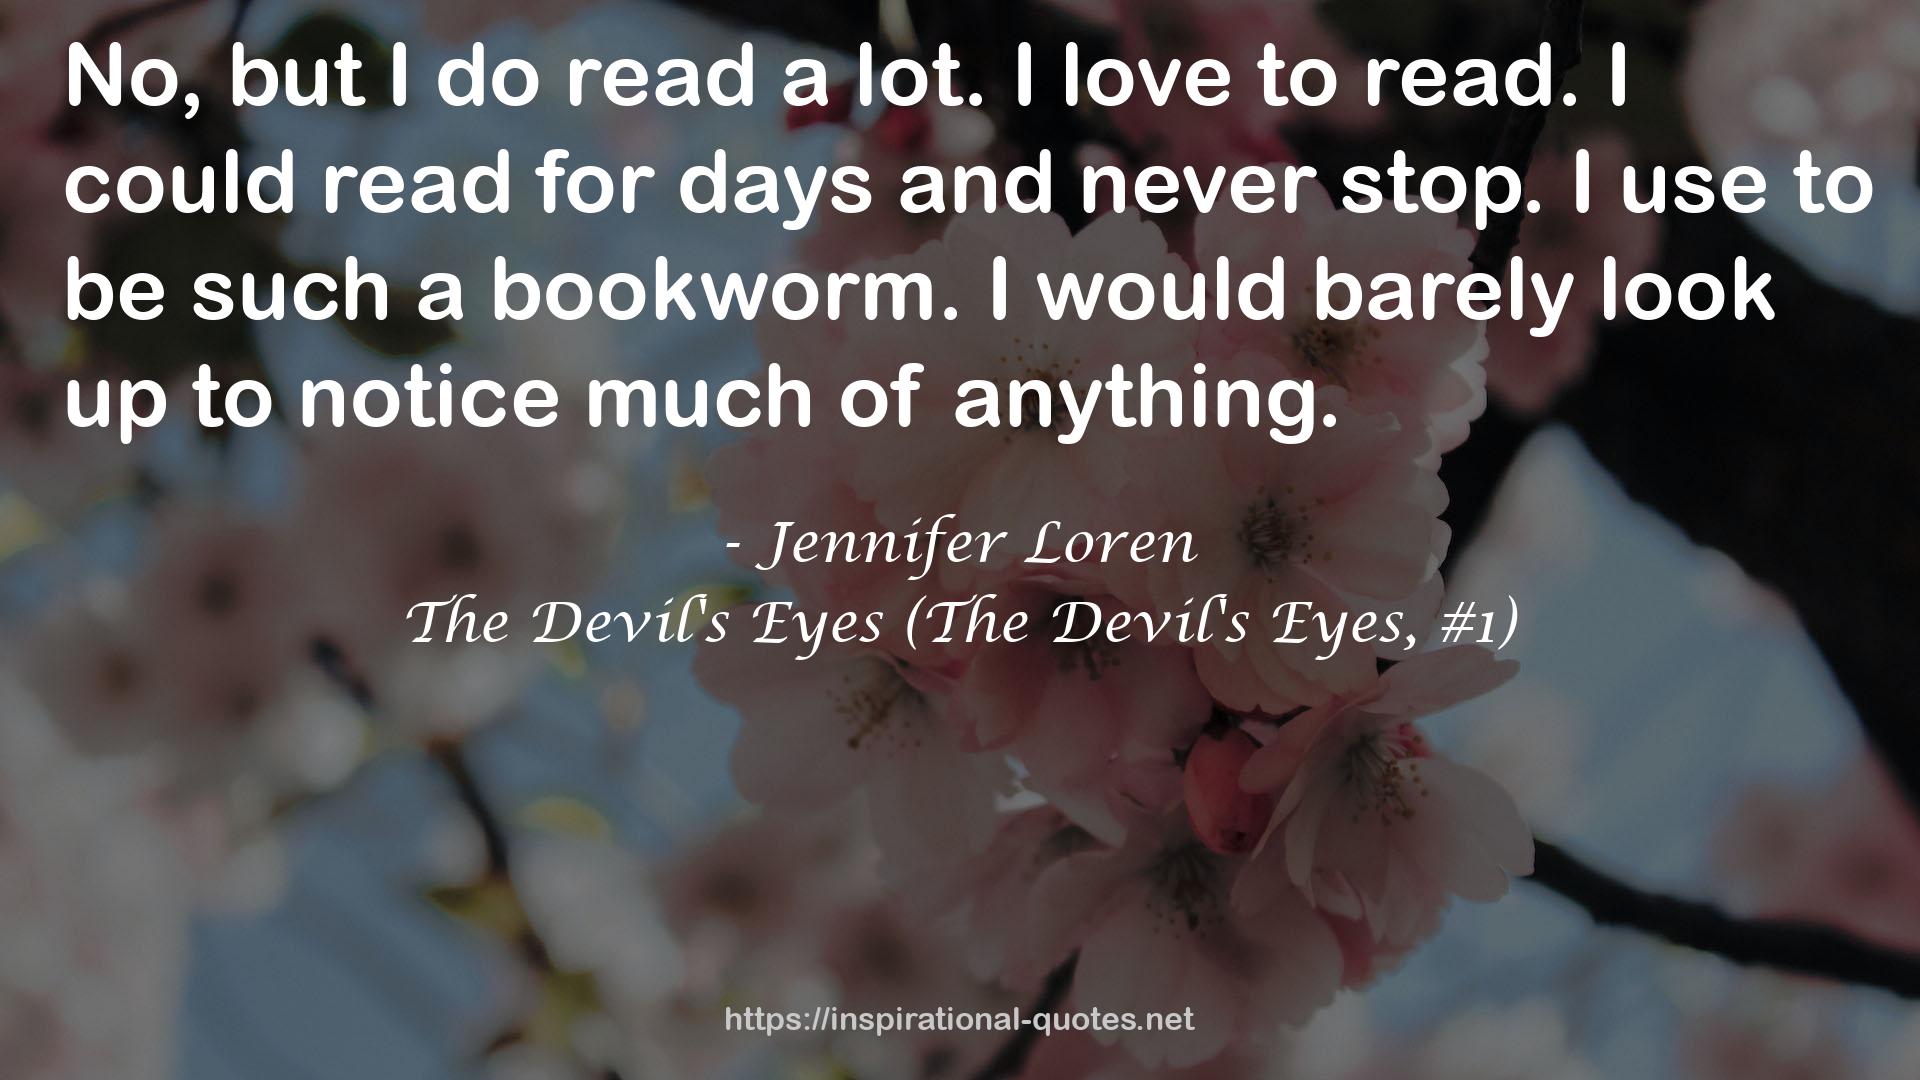 The Devil's Eyes (The Devil's Eyes, #1) QUOTES